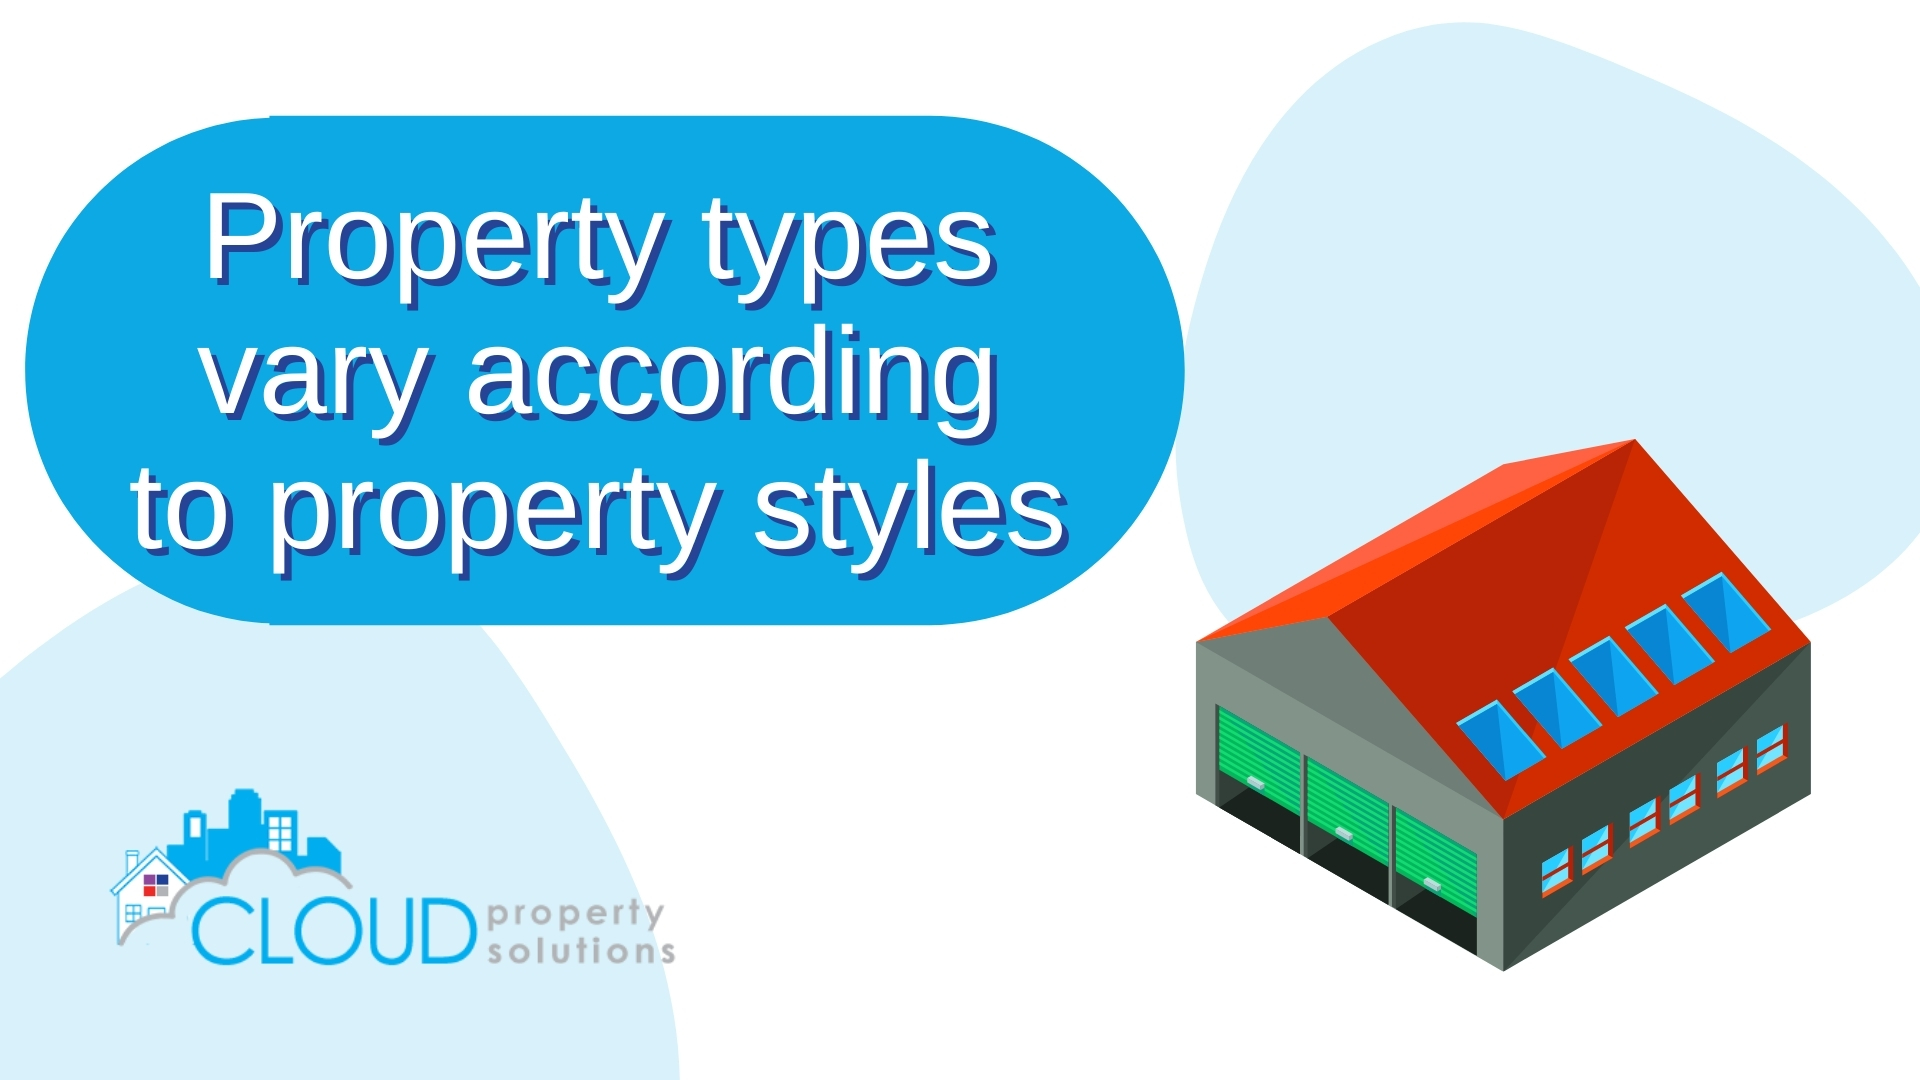 Property types vary according to property styles